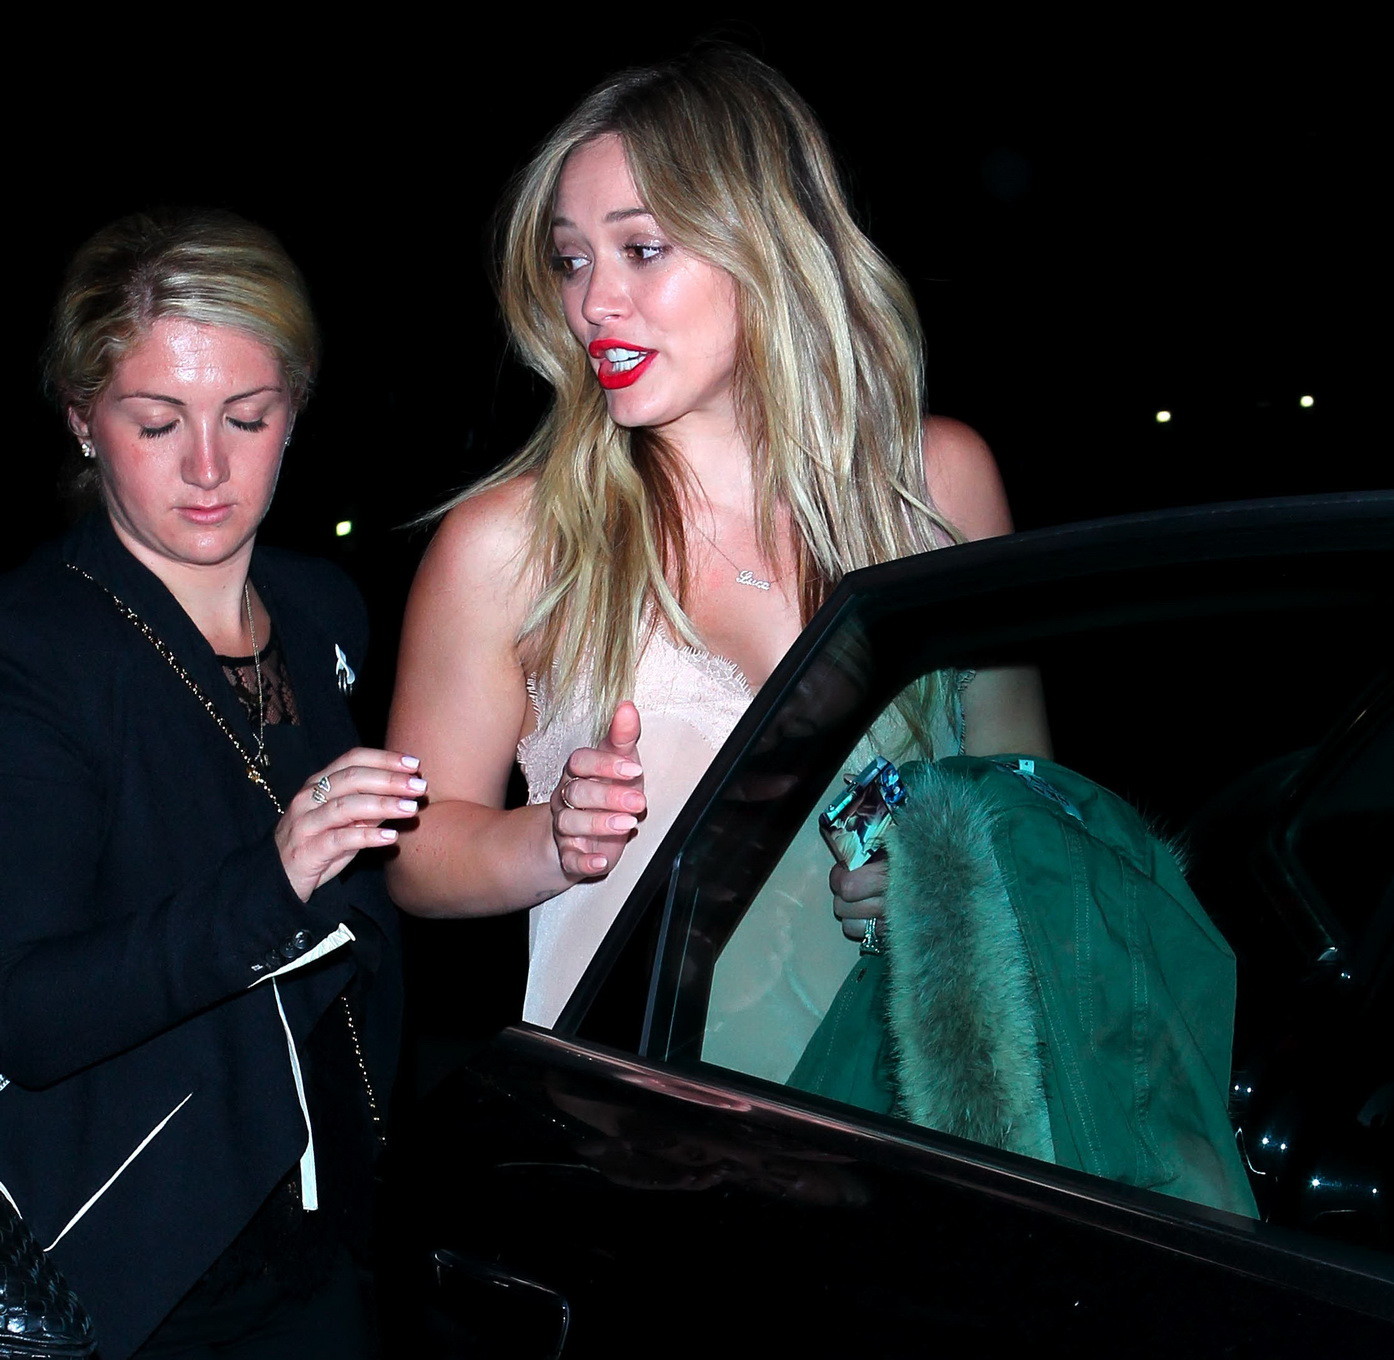 Hilary Duff wearing tank top and red tights leaving Pink concert at the Staples  #75215905